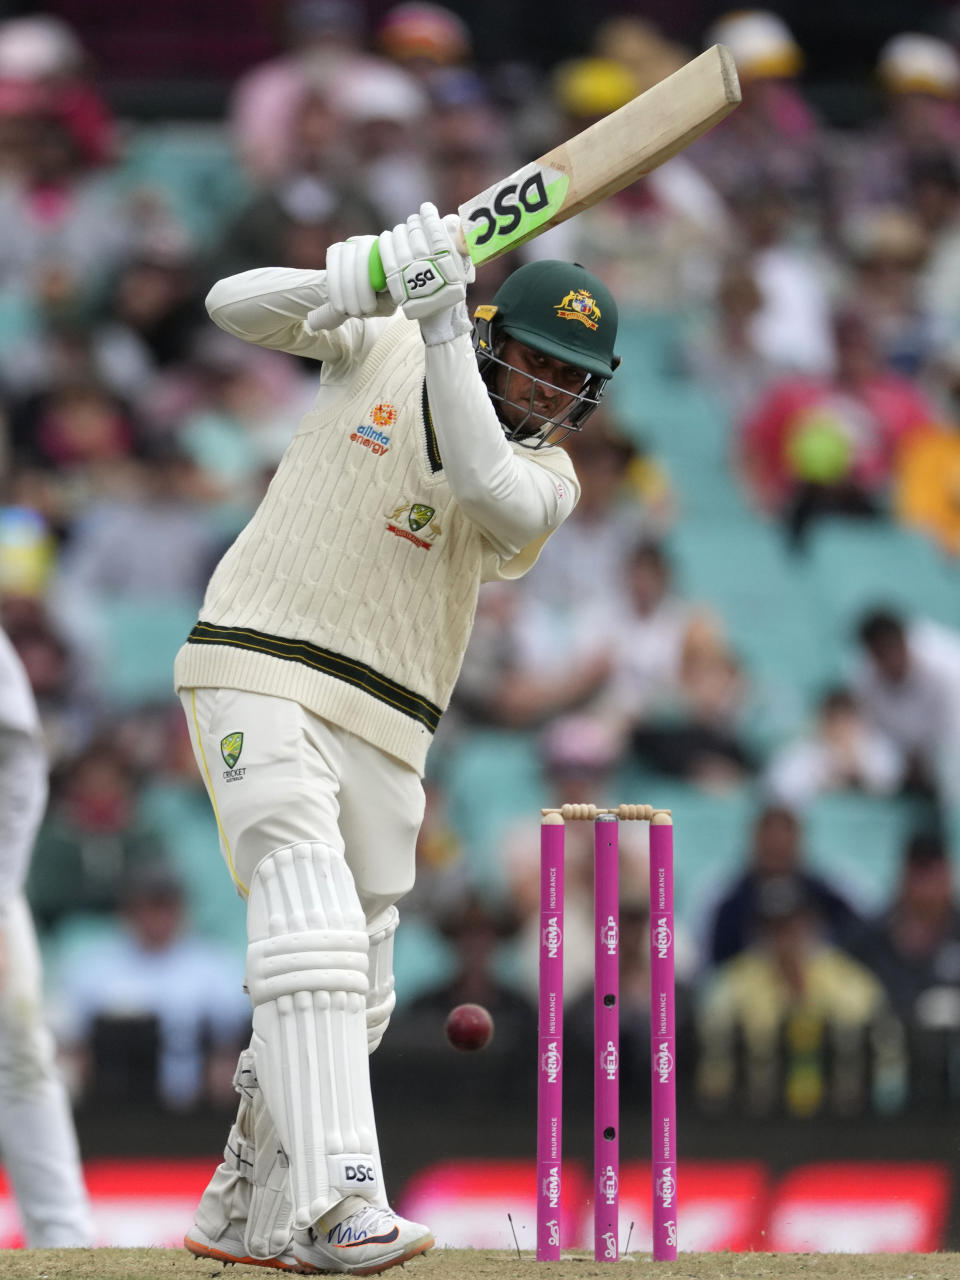 Australia's Usman Khawaja bats against South Africa during the second day of their cricket test match at the Sydney Cricket Ground in Sydney, Thursday, Jan. 5, 2023. (AP Photo/Rick Rycroft)